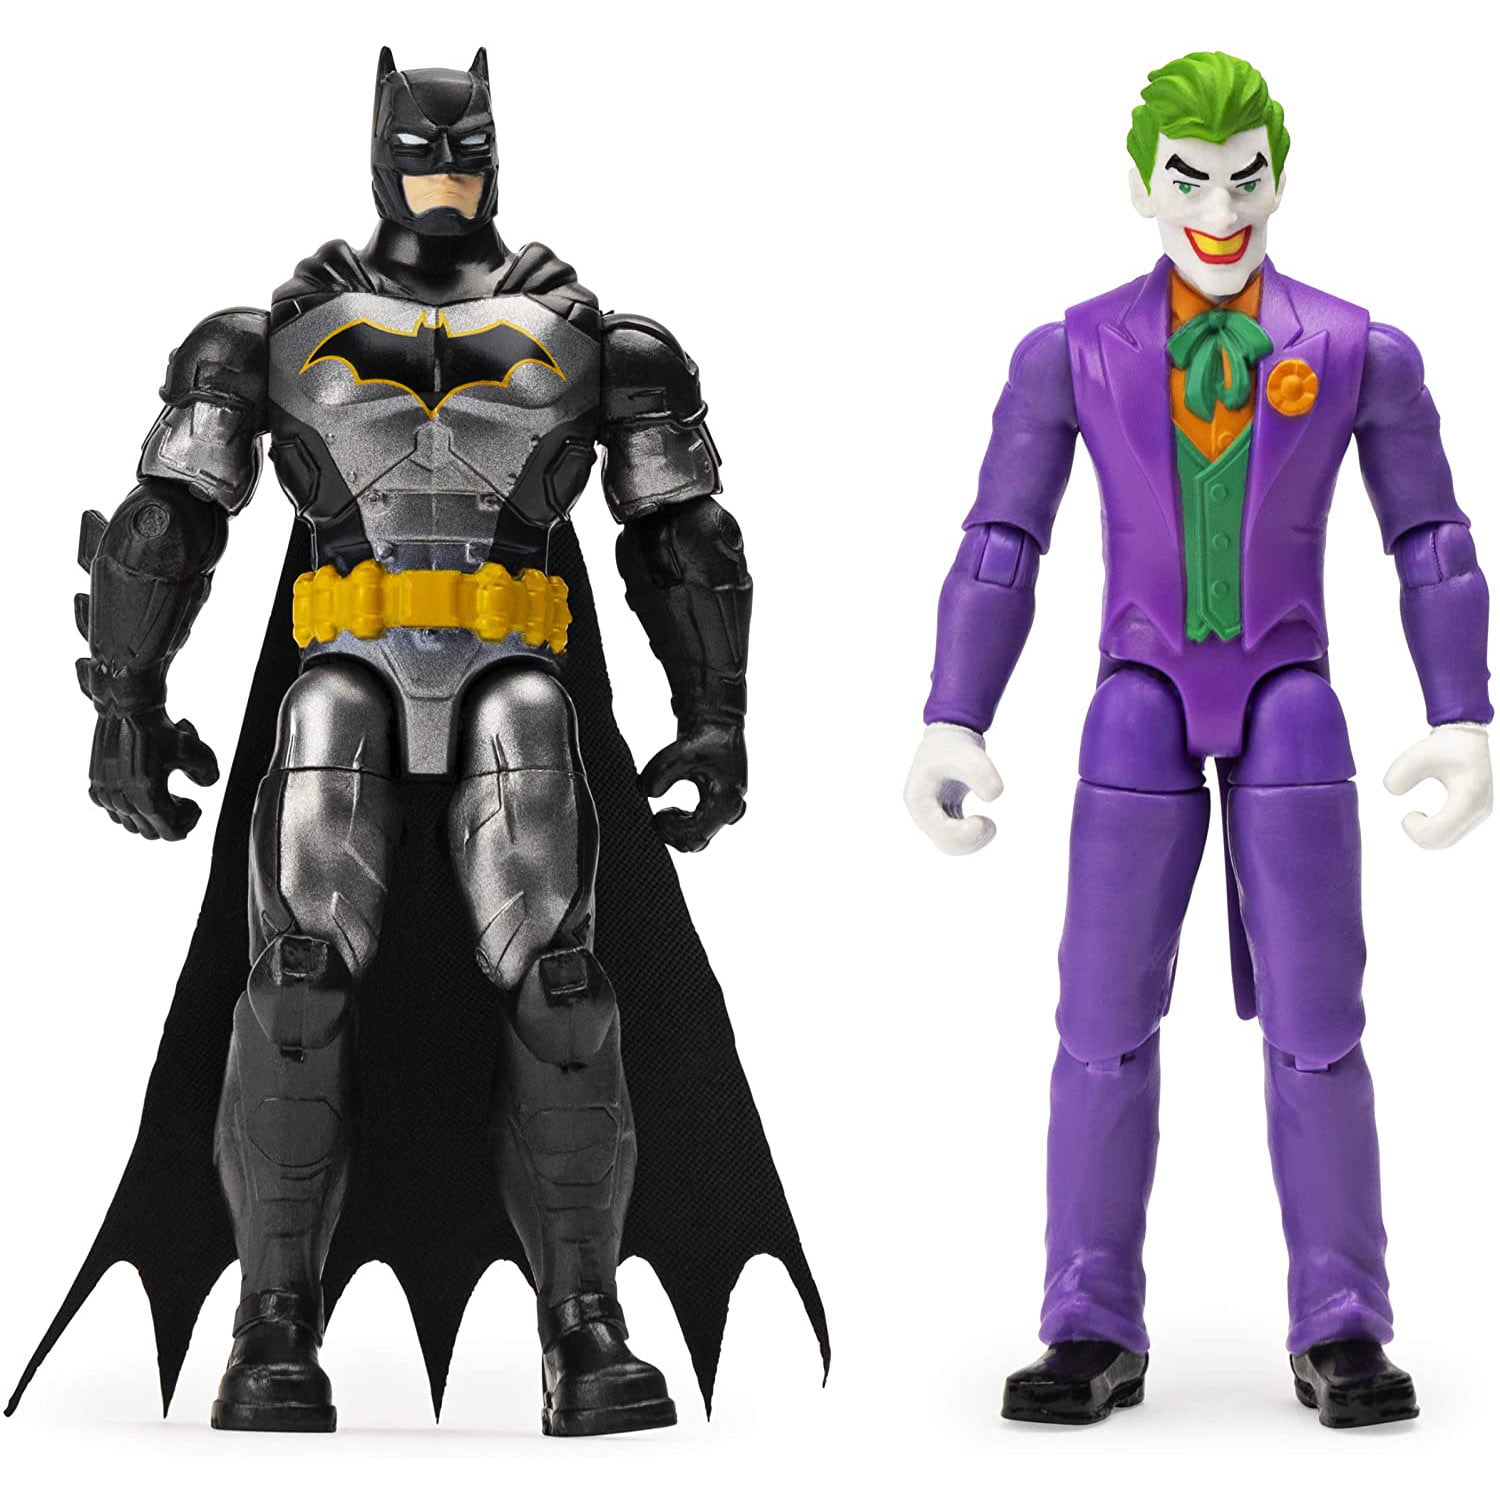 DC The Joker Spin Master 4" Action Figure Batman 1st Edition A7 for sale online 